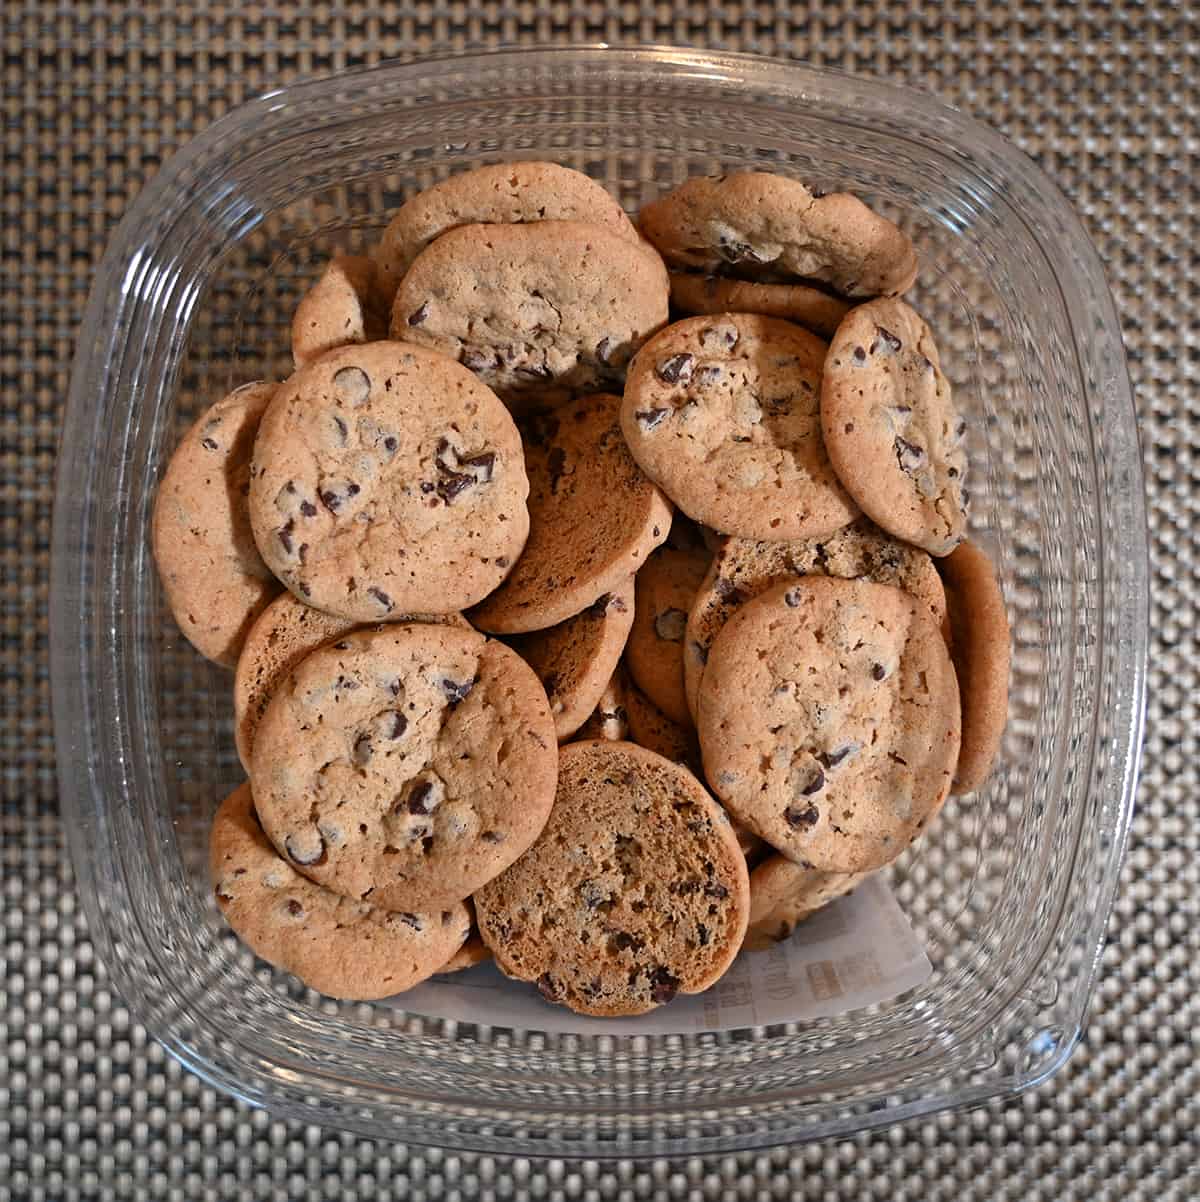 Top down image of the container of cookies with the lid off showing the cookies.